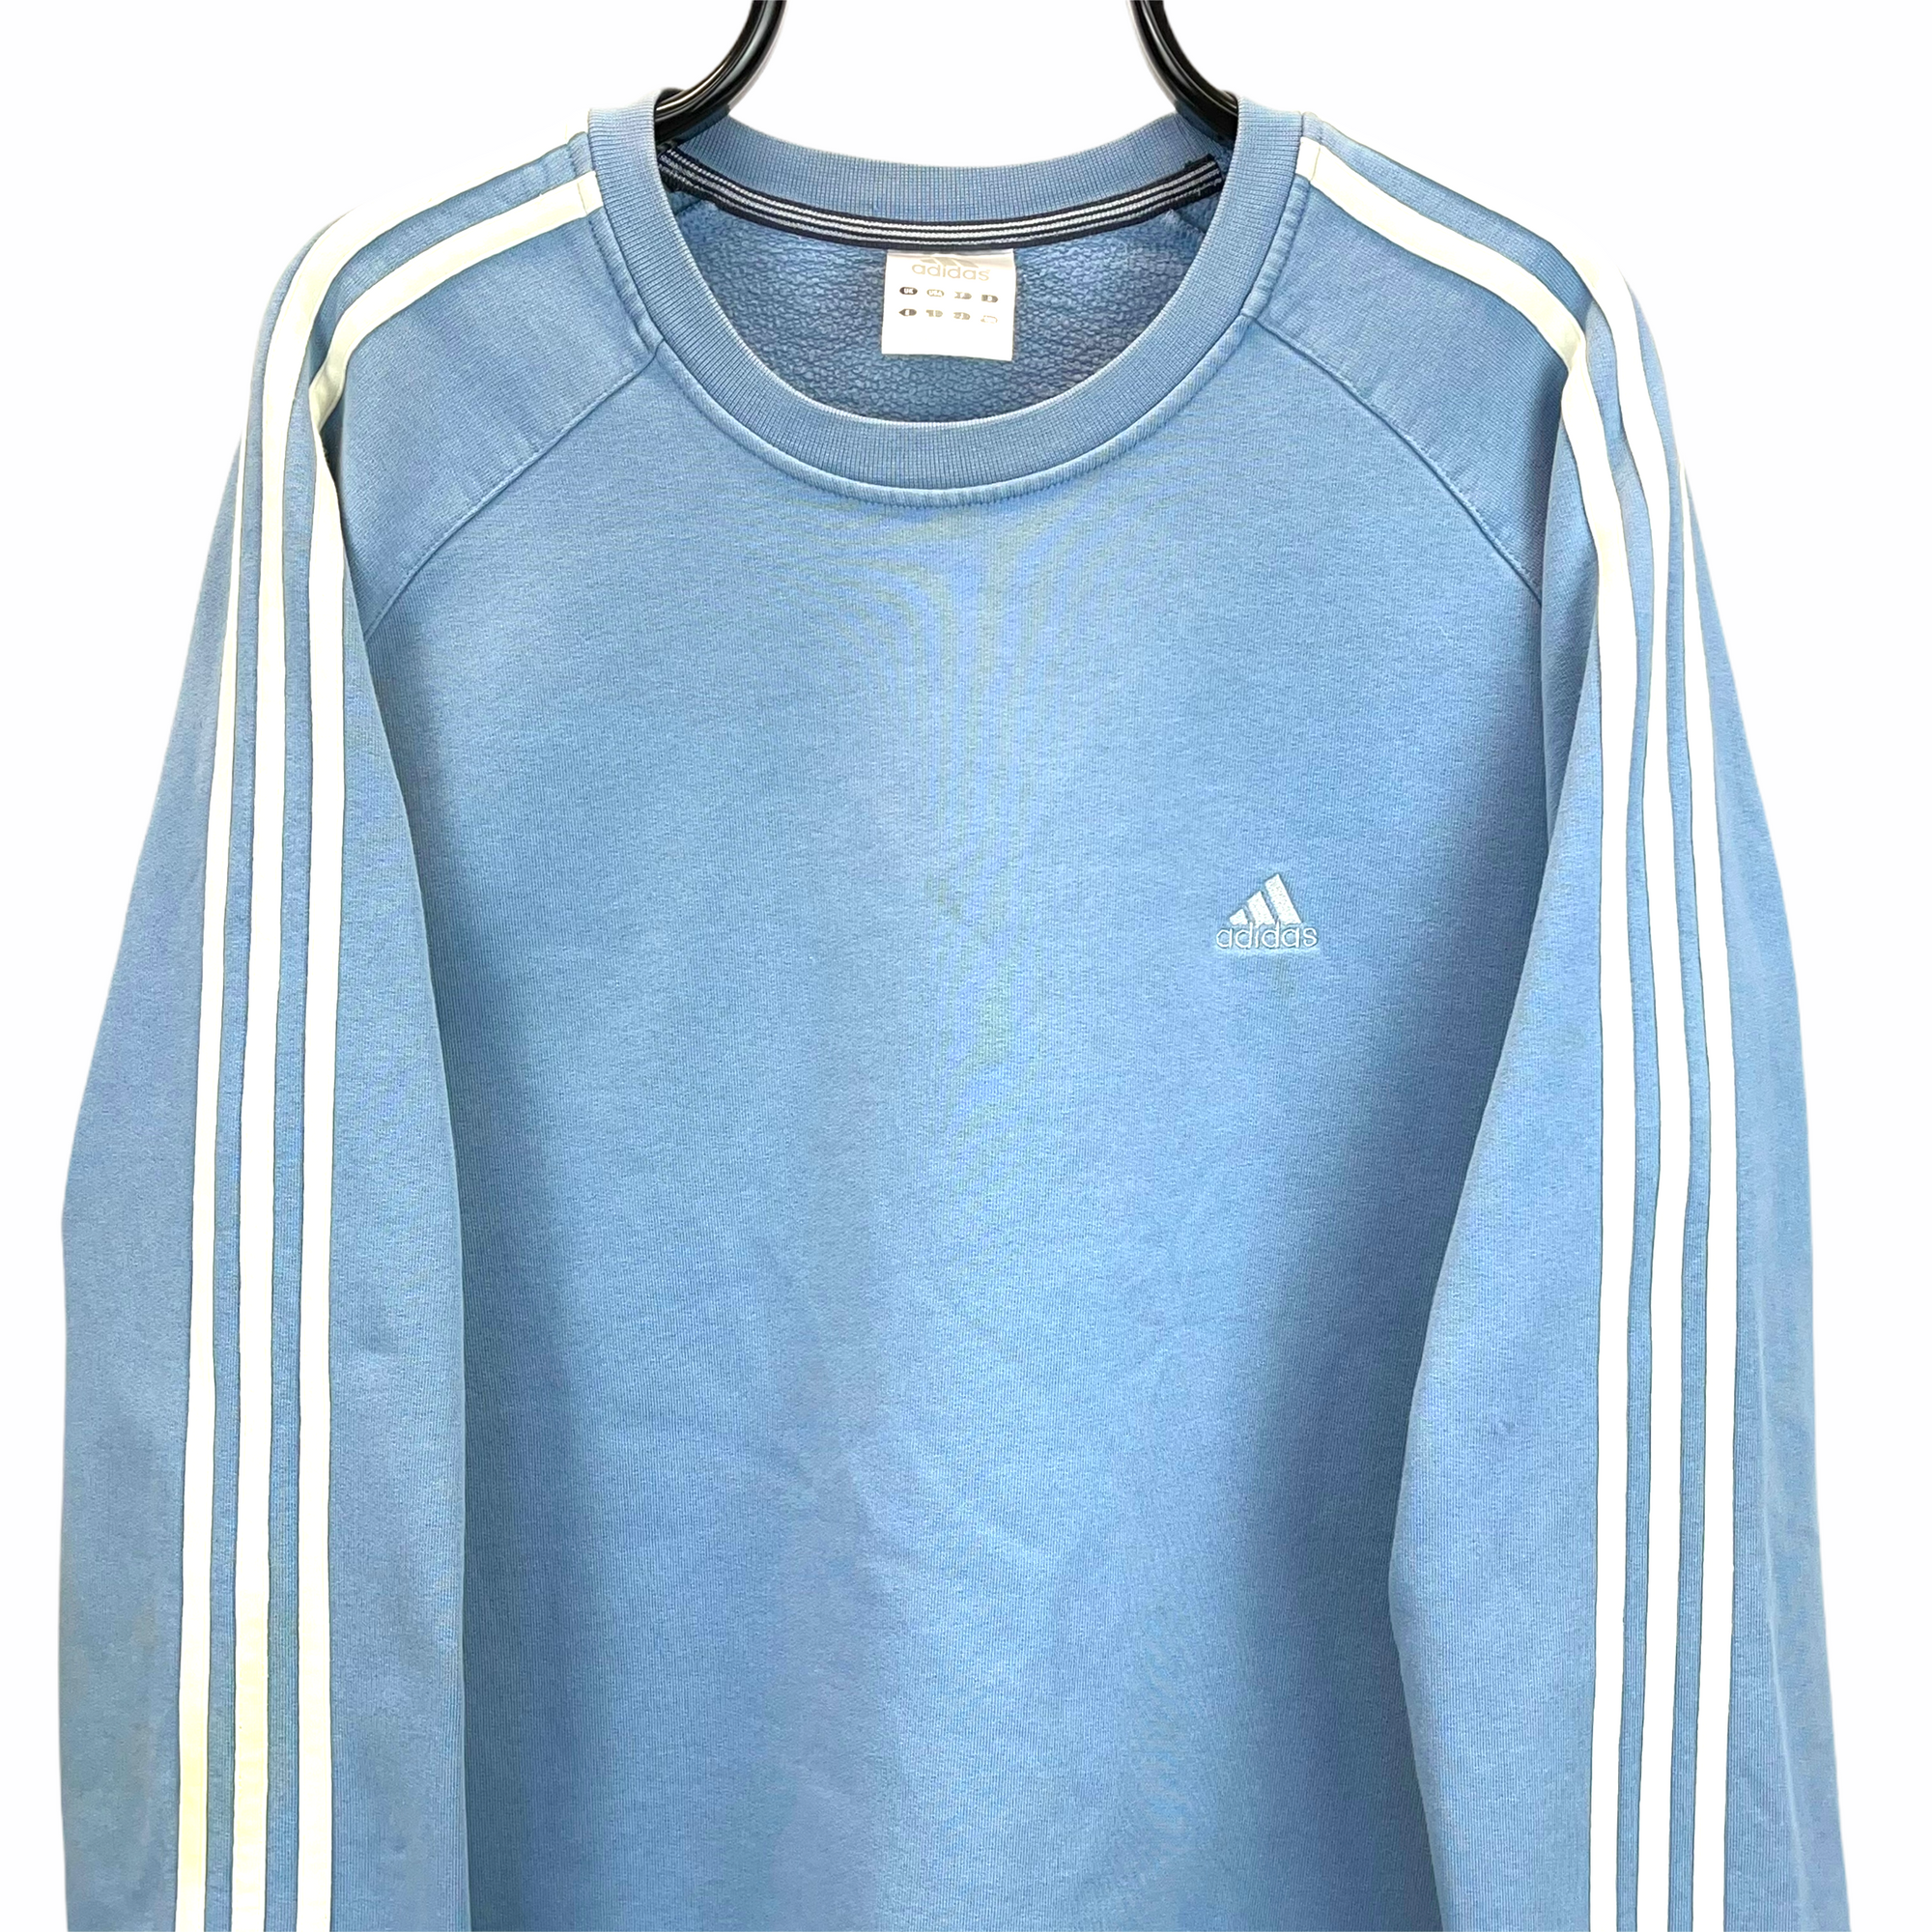 Vintage Adidas Embroidered Small Logo Sweatshirt in Baby Blue - Men's Large/Women's XL